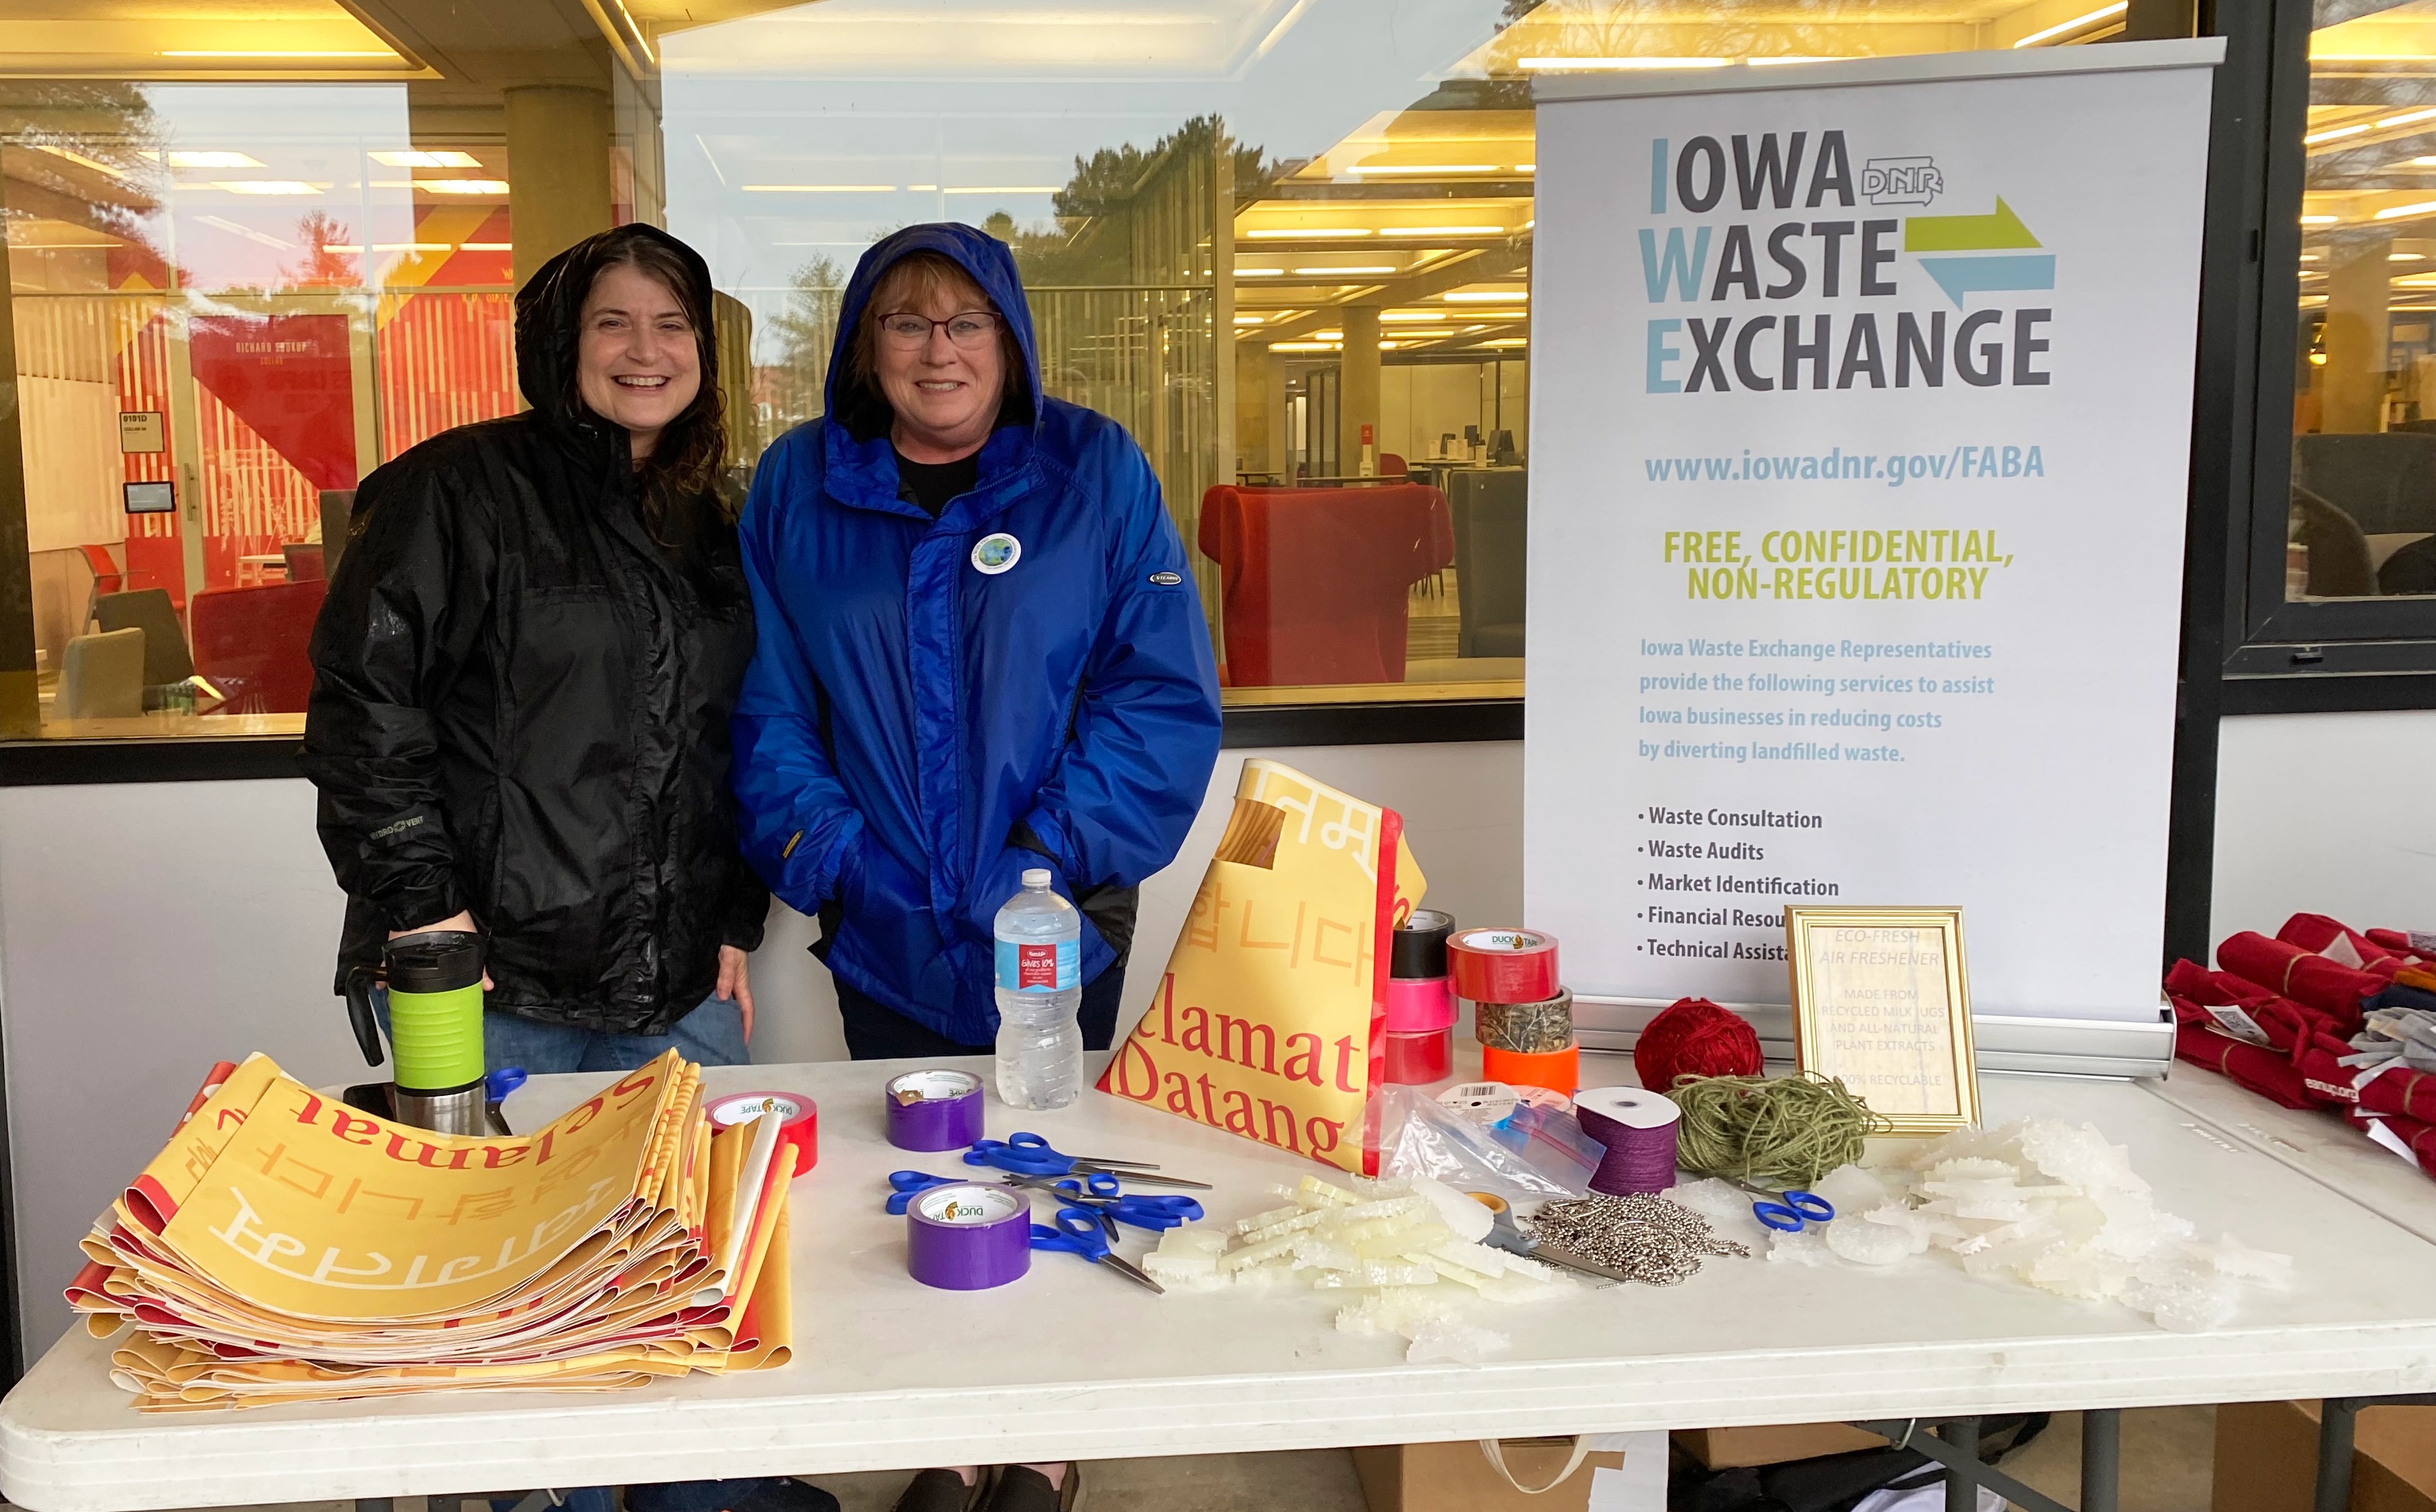 Merry Rankin with Shelly Codner at the Iowa Waste Exchange table